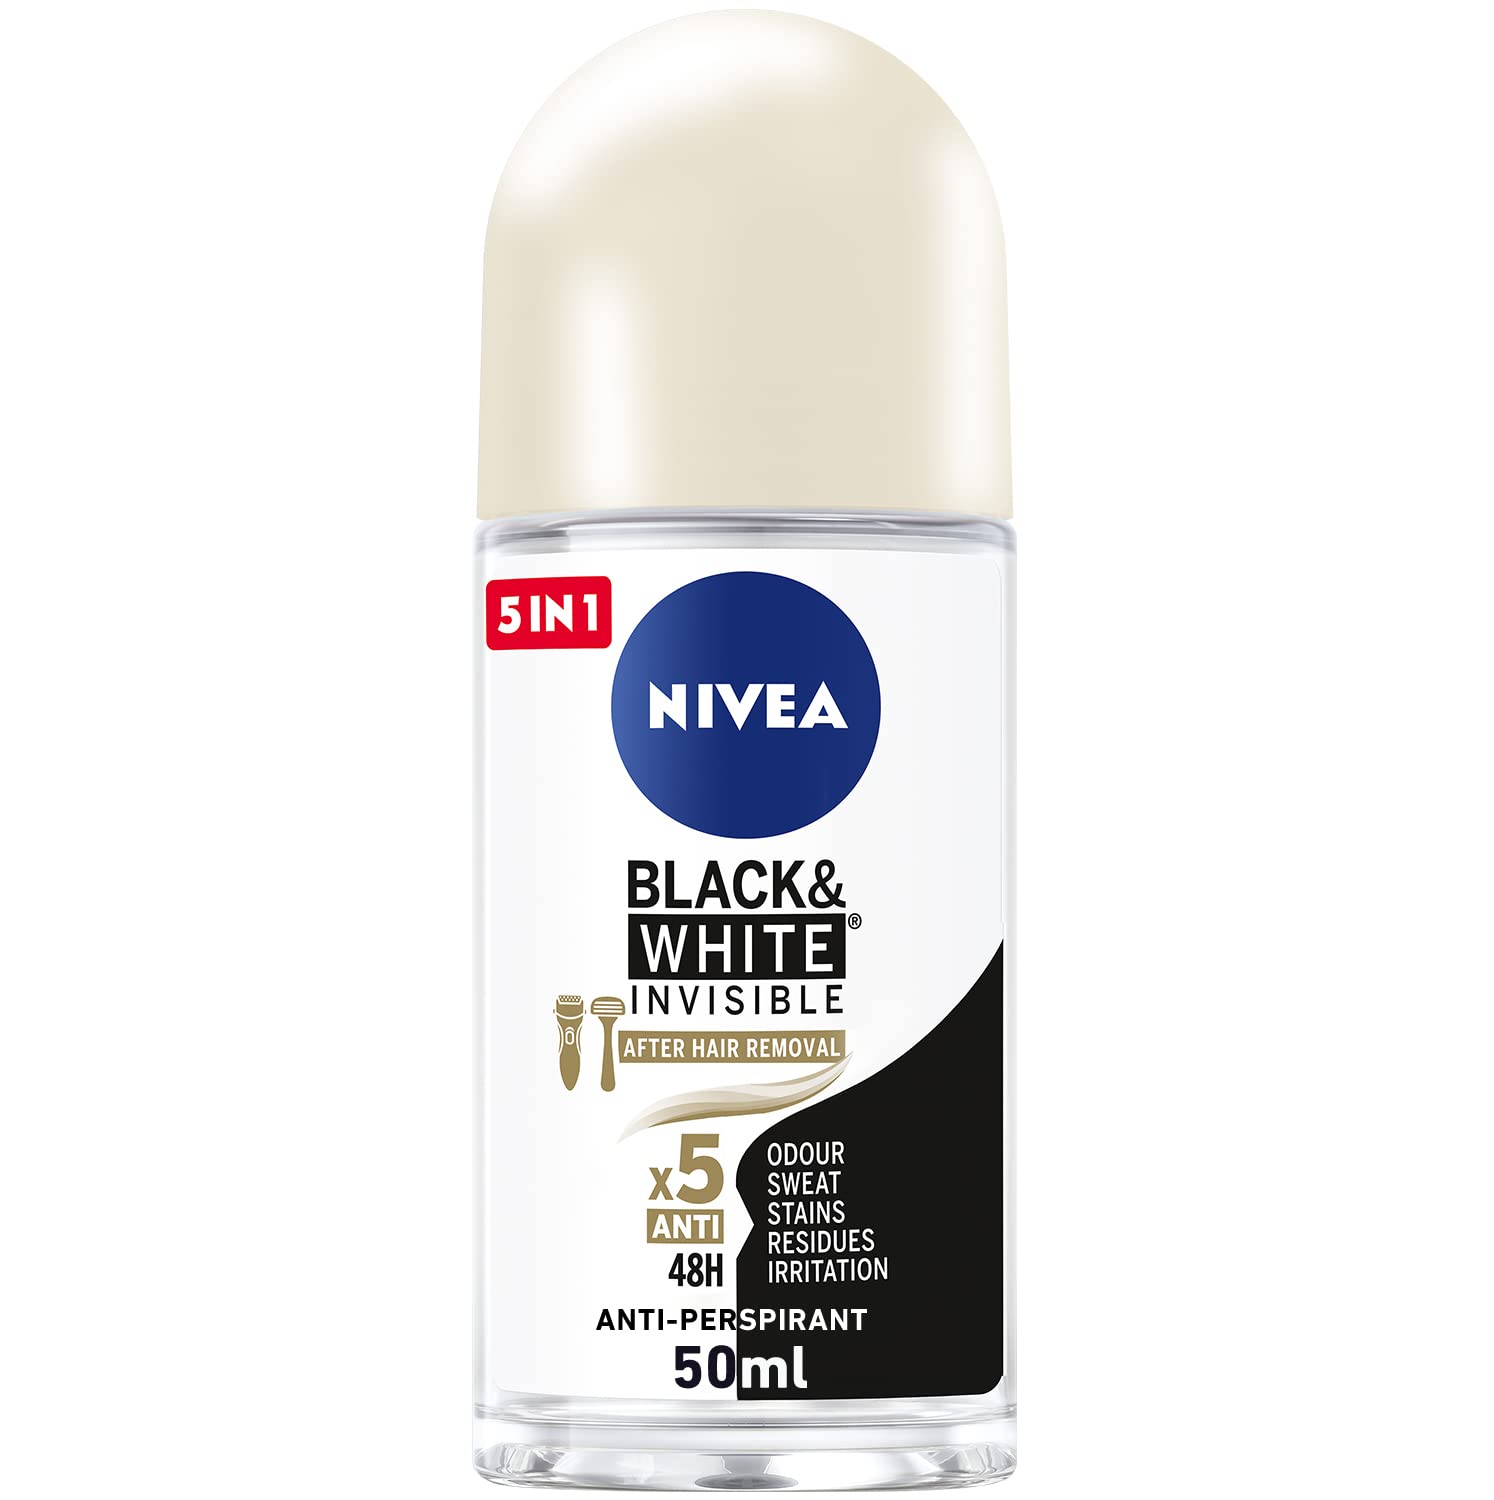 NIVEA Roll-on Invisible after HAIR REMOVAL -50ml